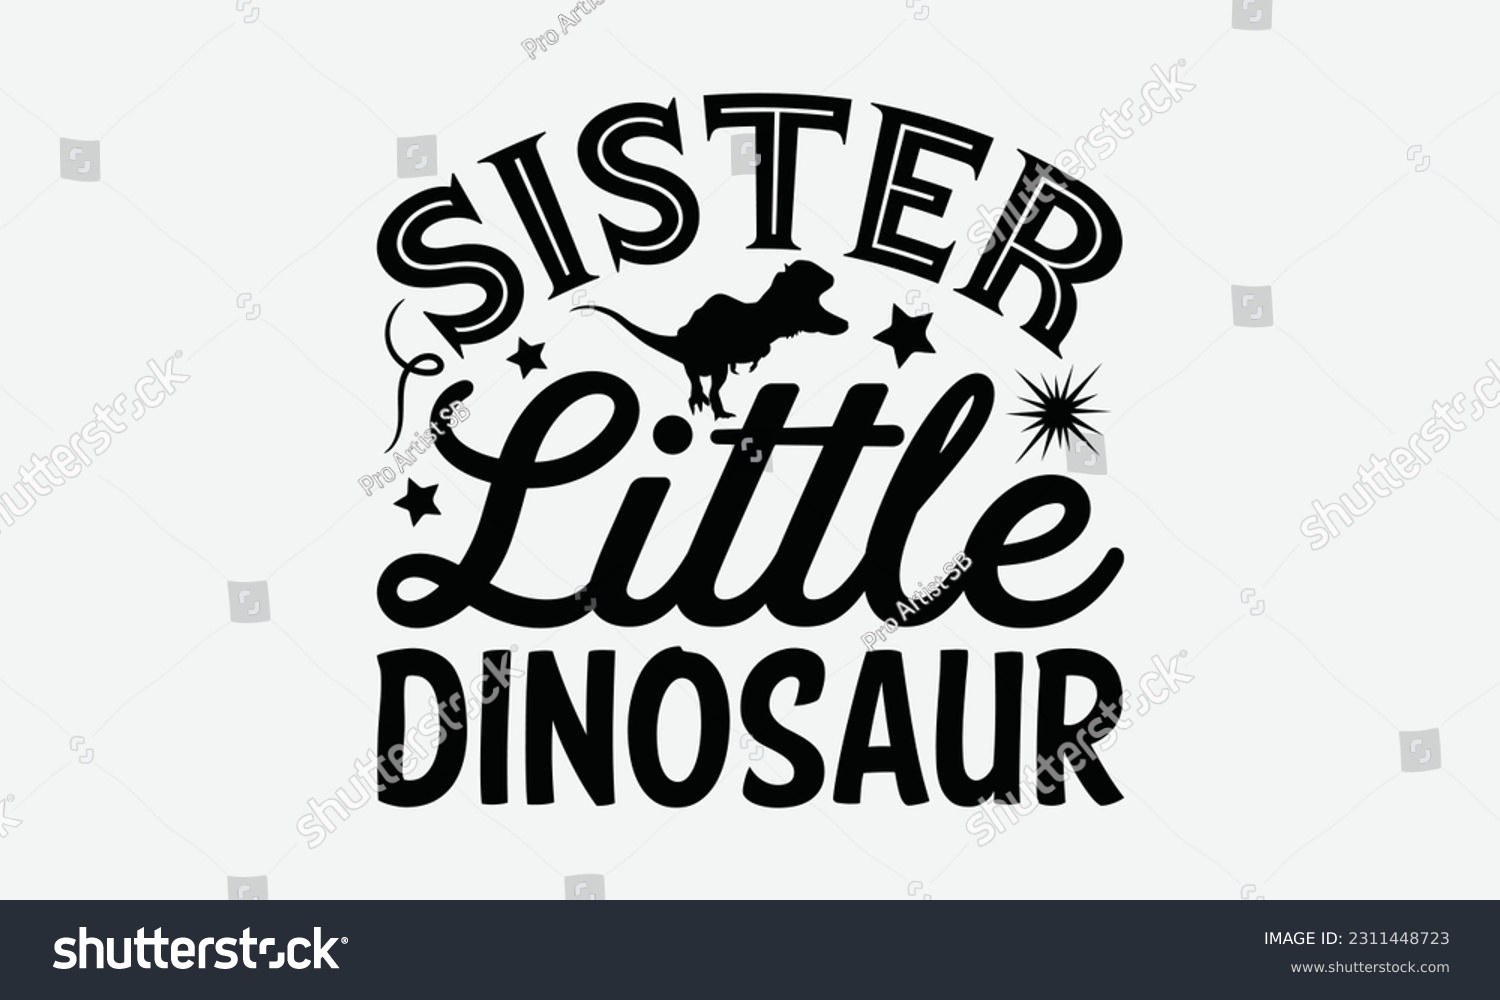 SVG of Sister Little Dinosaur - Dinosaur SVG Design, Handmade Calligraphy Vector Illustration, Greeting Card Template With Typography Text. svg